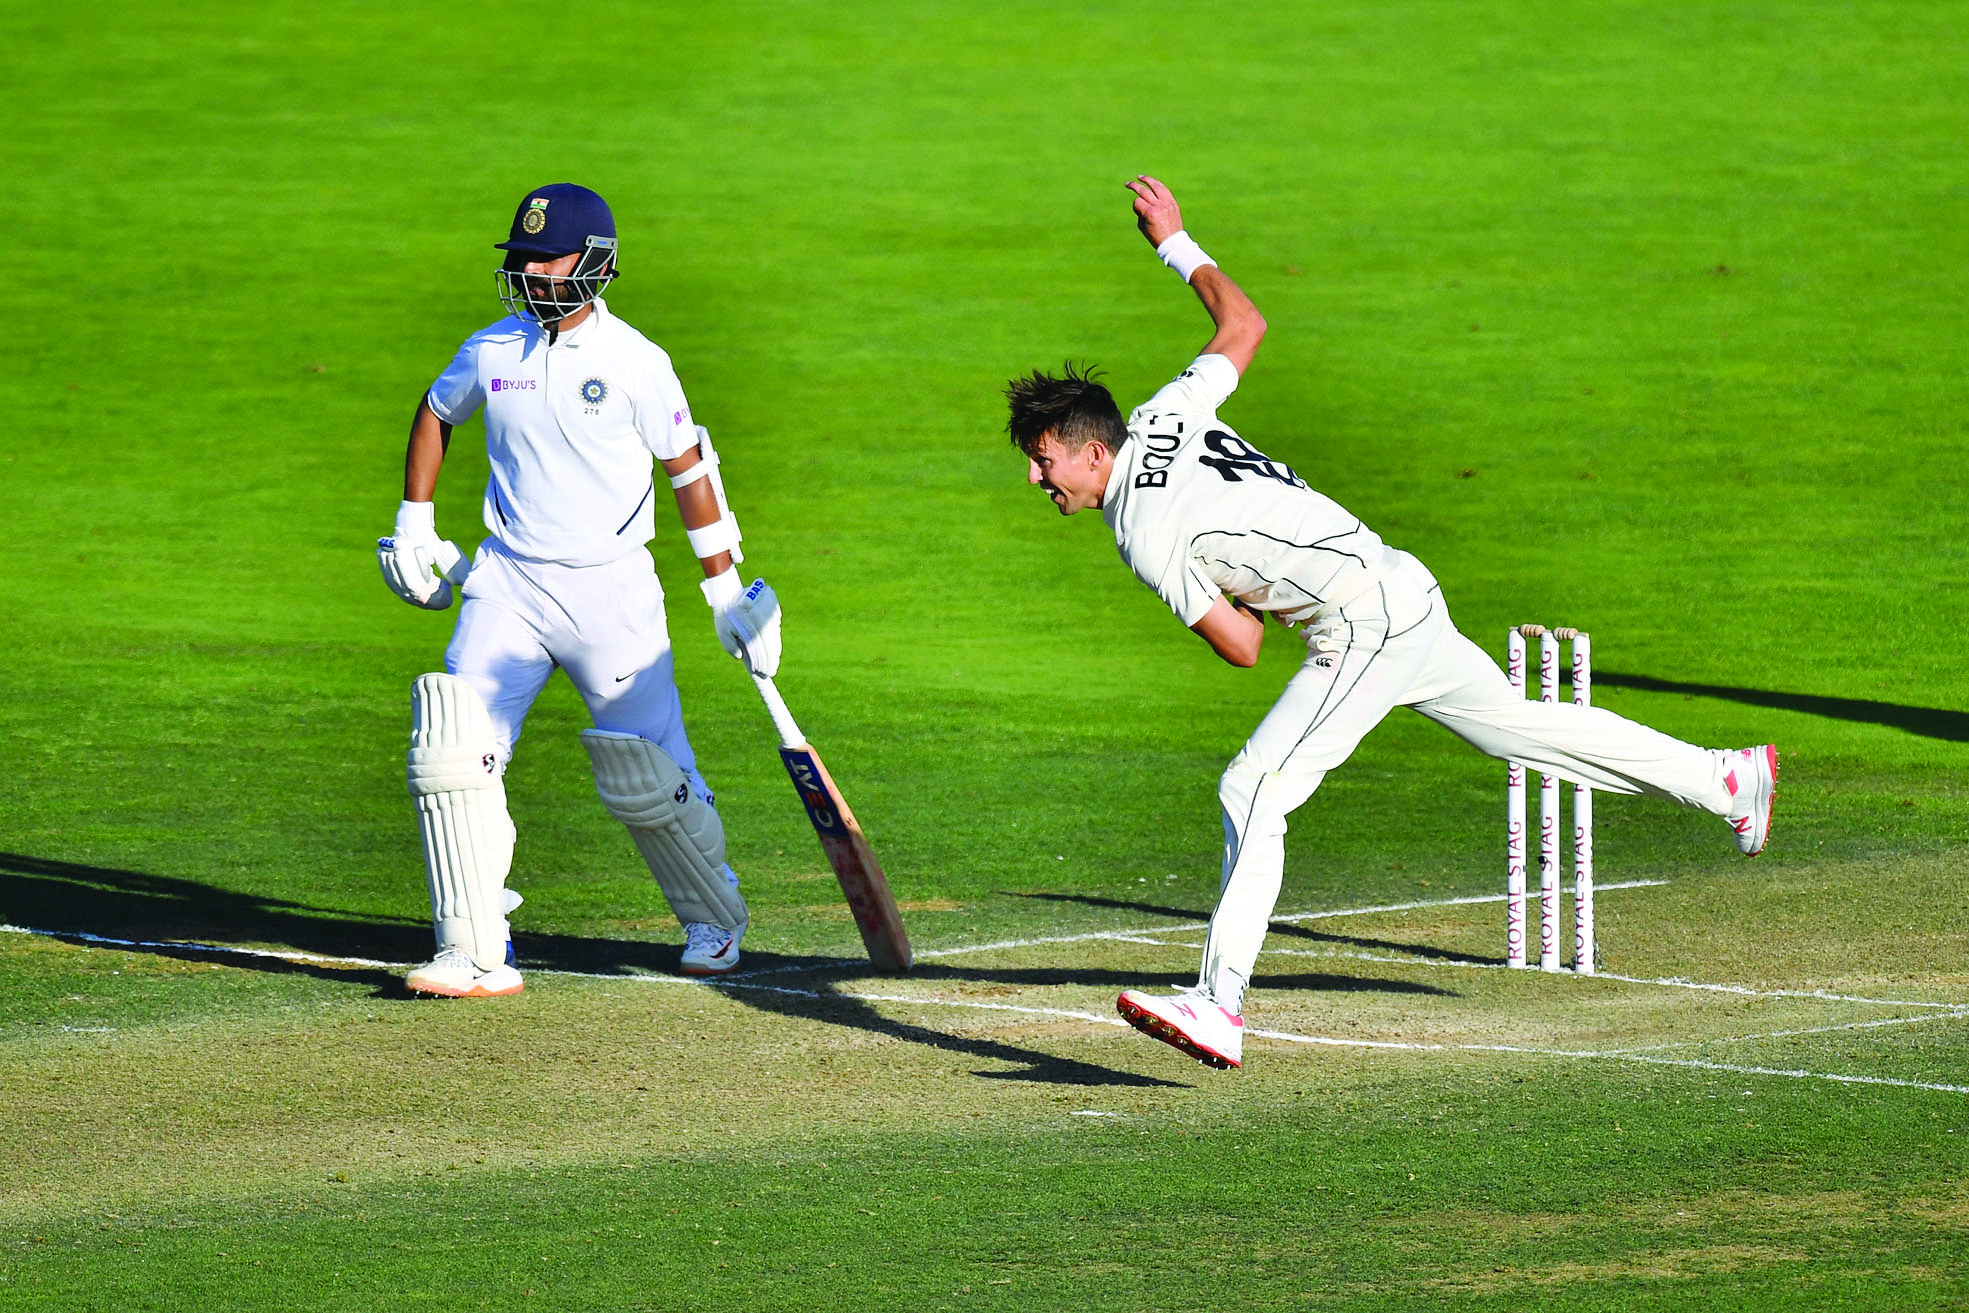 New Zealand's Trent Boult (R bowls with India's Ajinkya Rahane during day three of the first Test cricket match between New Zealand and India at the Basin Reserve in Wellington on February 23, 2020. (Photo by Marty MELVILLE / AFP)